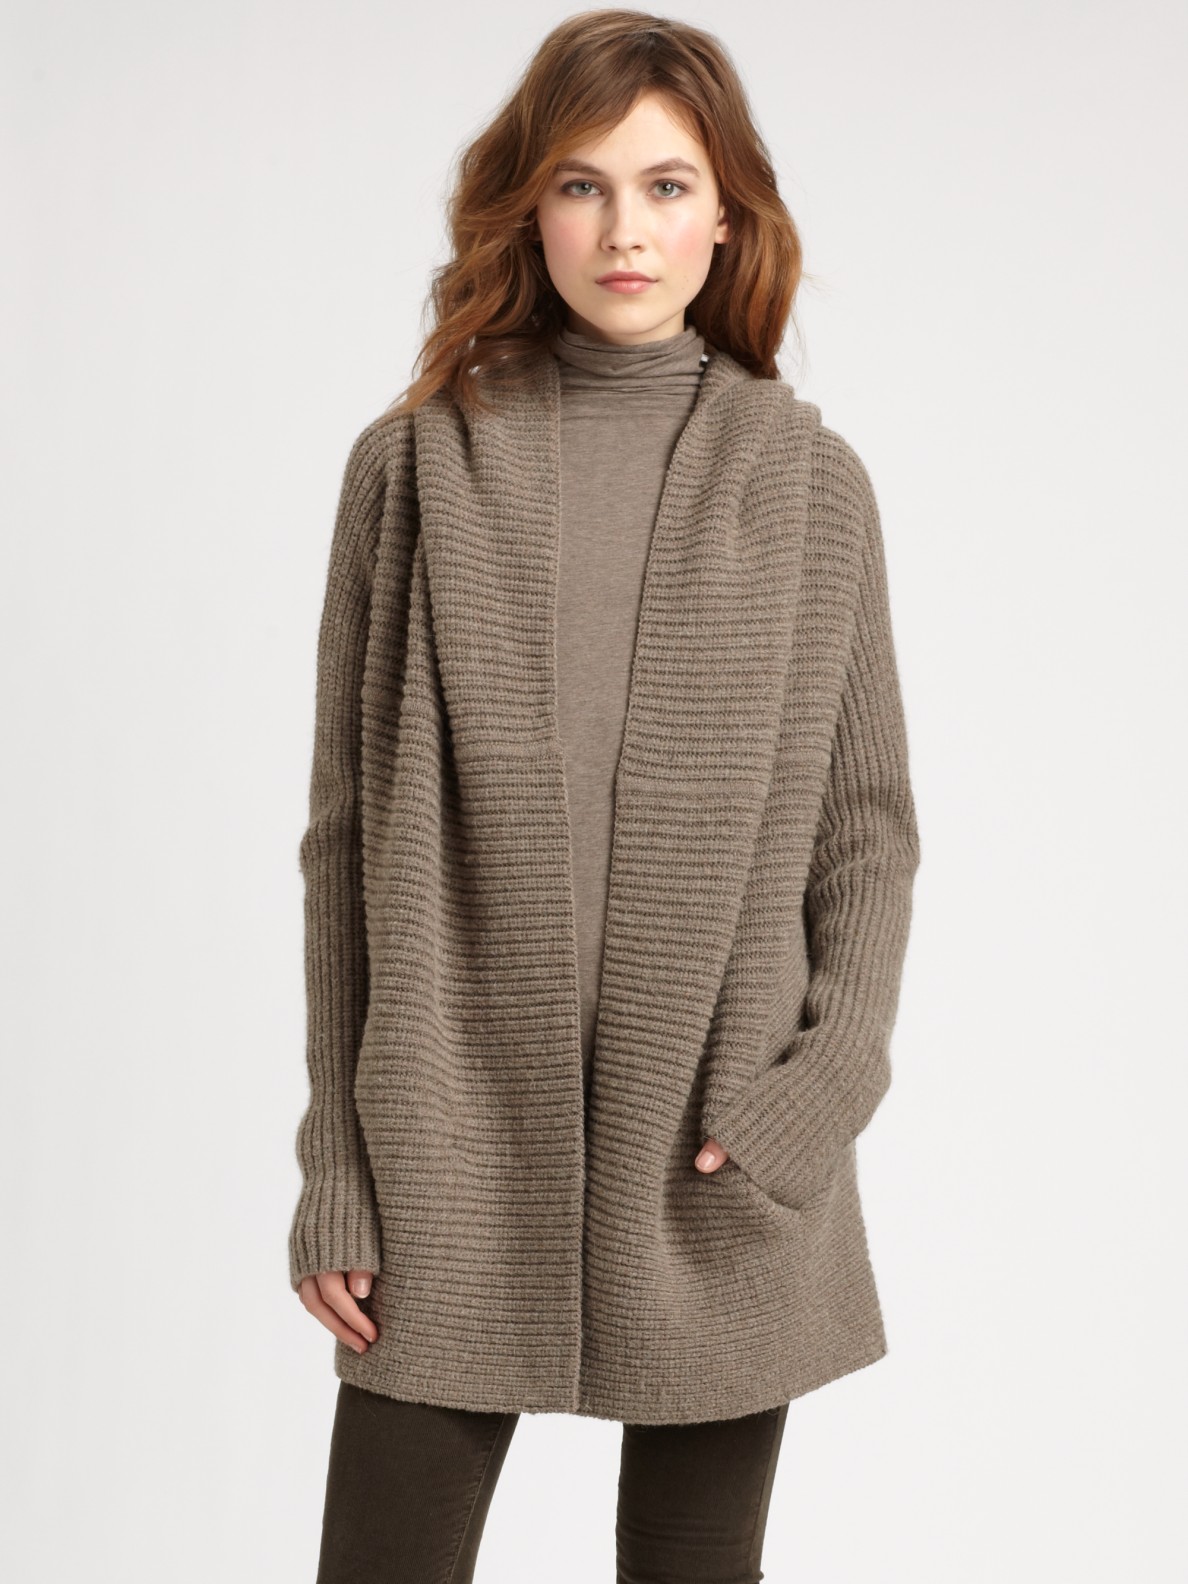 Lyst - Vince Hooded Cardigan in Gray